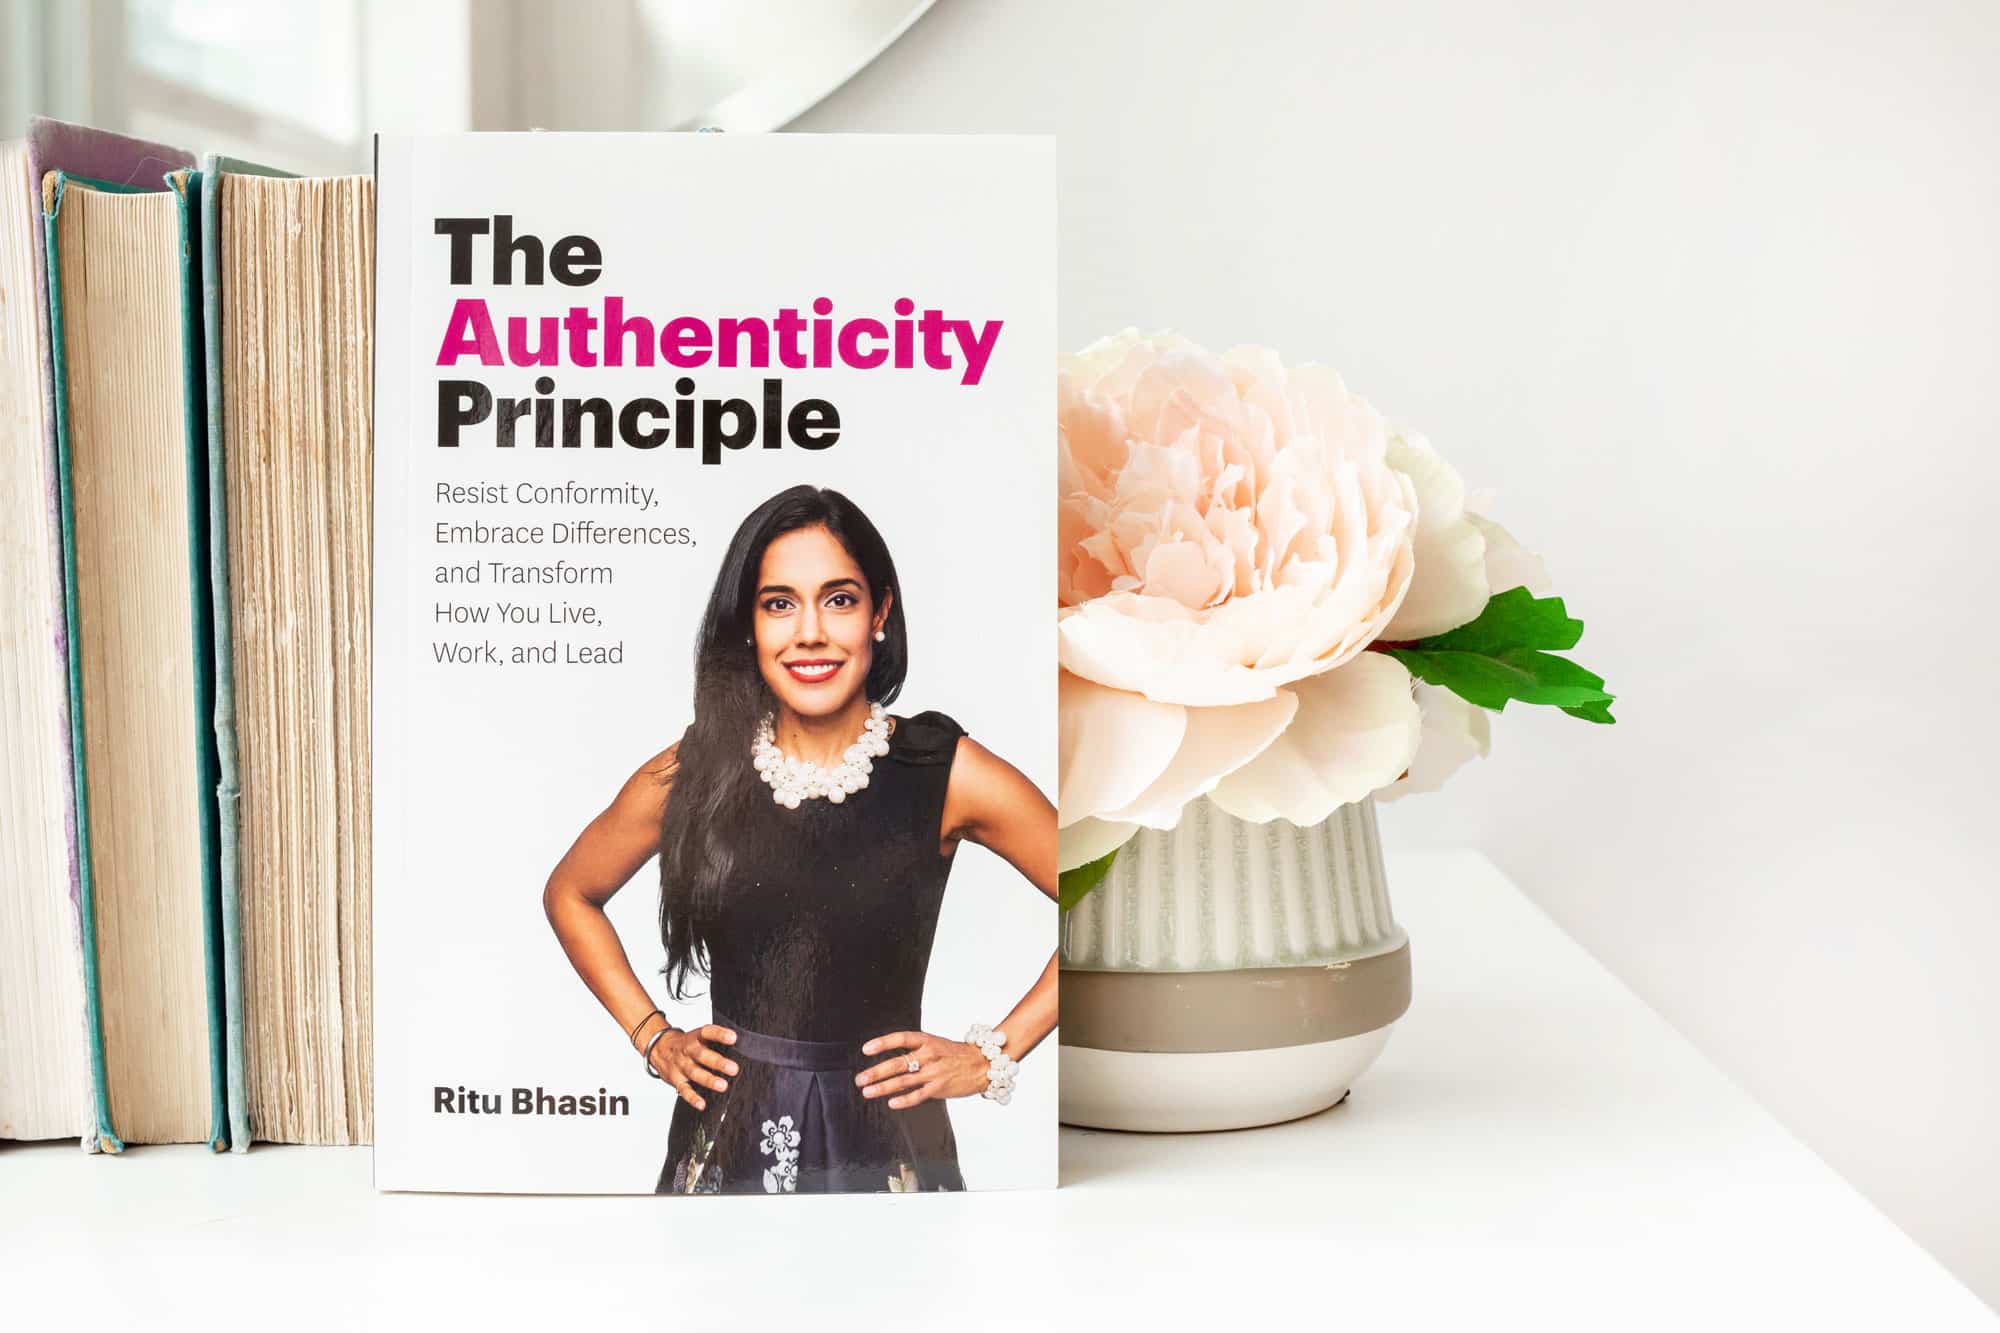 Ritu Bhasin's book The Authenticity Principle sitting on a white table in front of a stack of old books with the pages facing forward and a vase with a large pale pink flower.